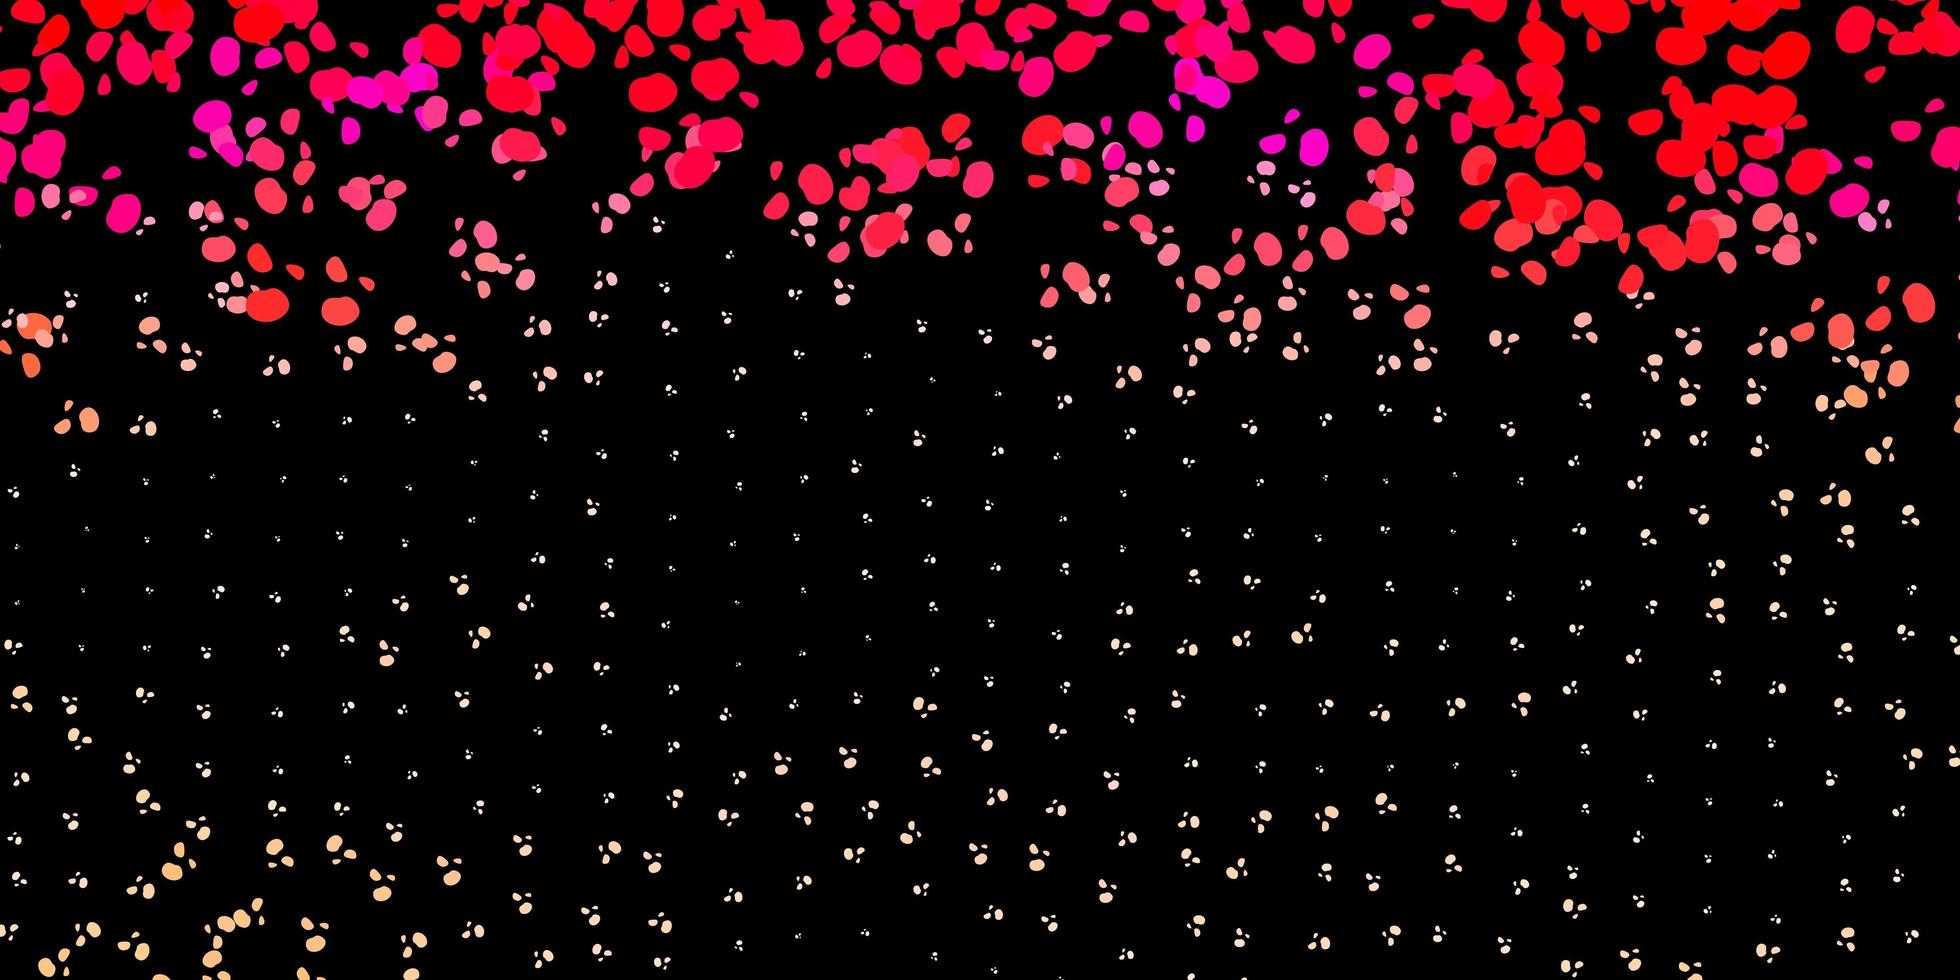 Dark red pattern with abstract shapes. vector